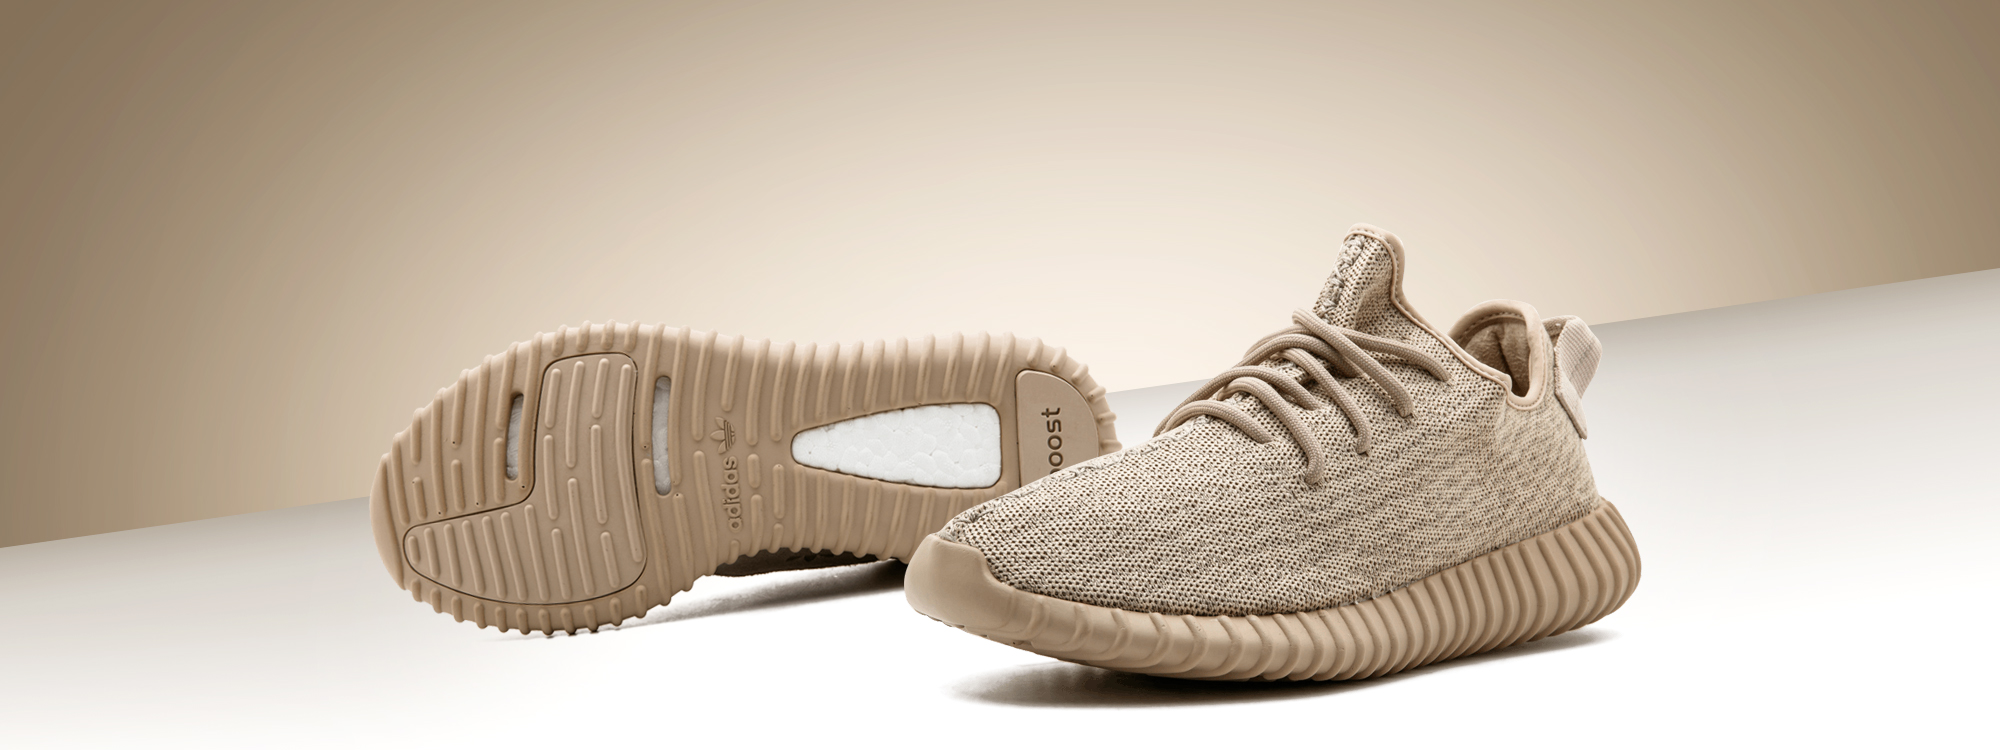  Yeezy Boost  350 Oxford Tan shoes price